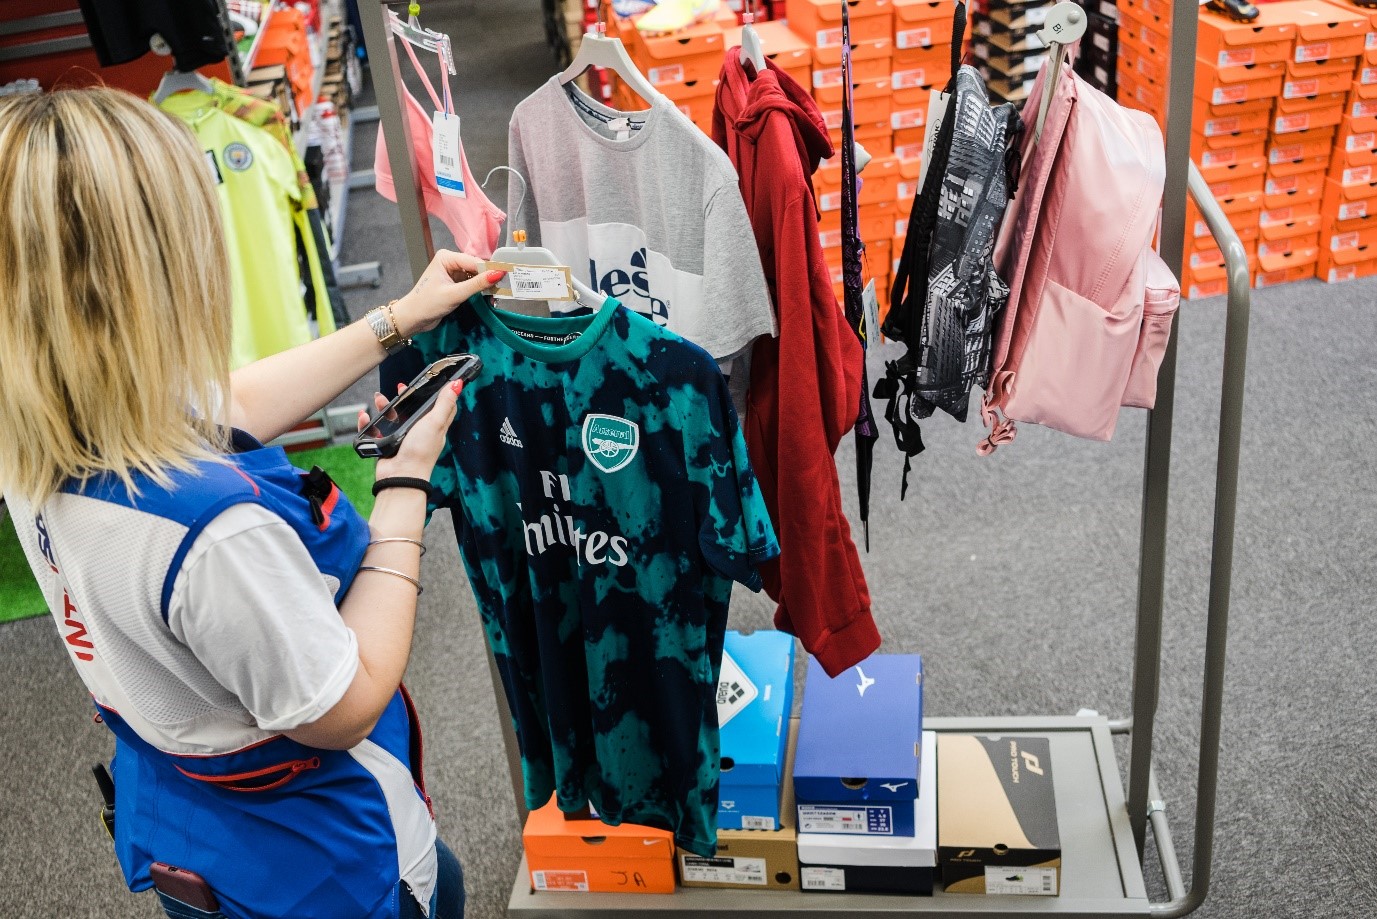 INTERSPORT reduces new product data processing time by 50% with artificial intelligence solutions from Unifai, an Akeneo company